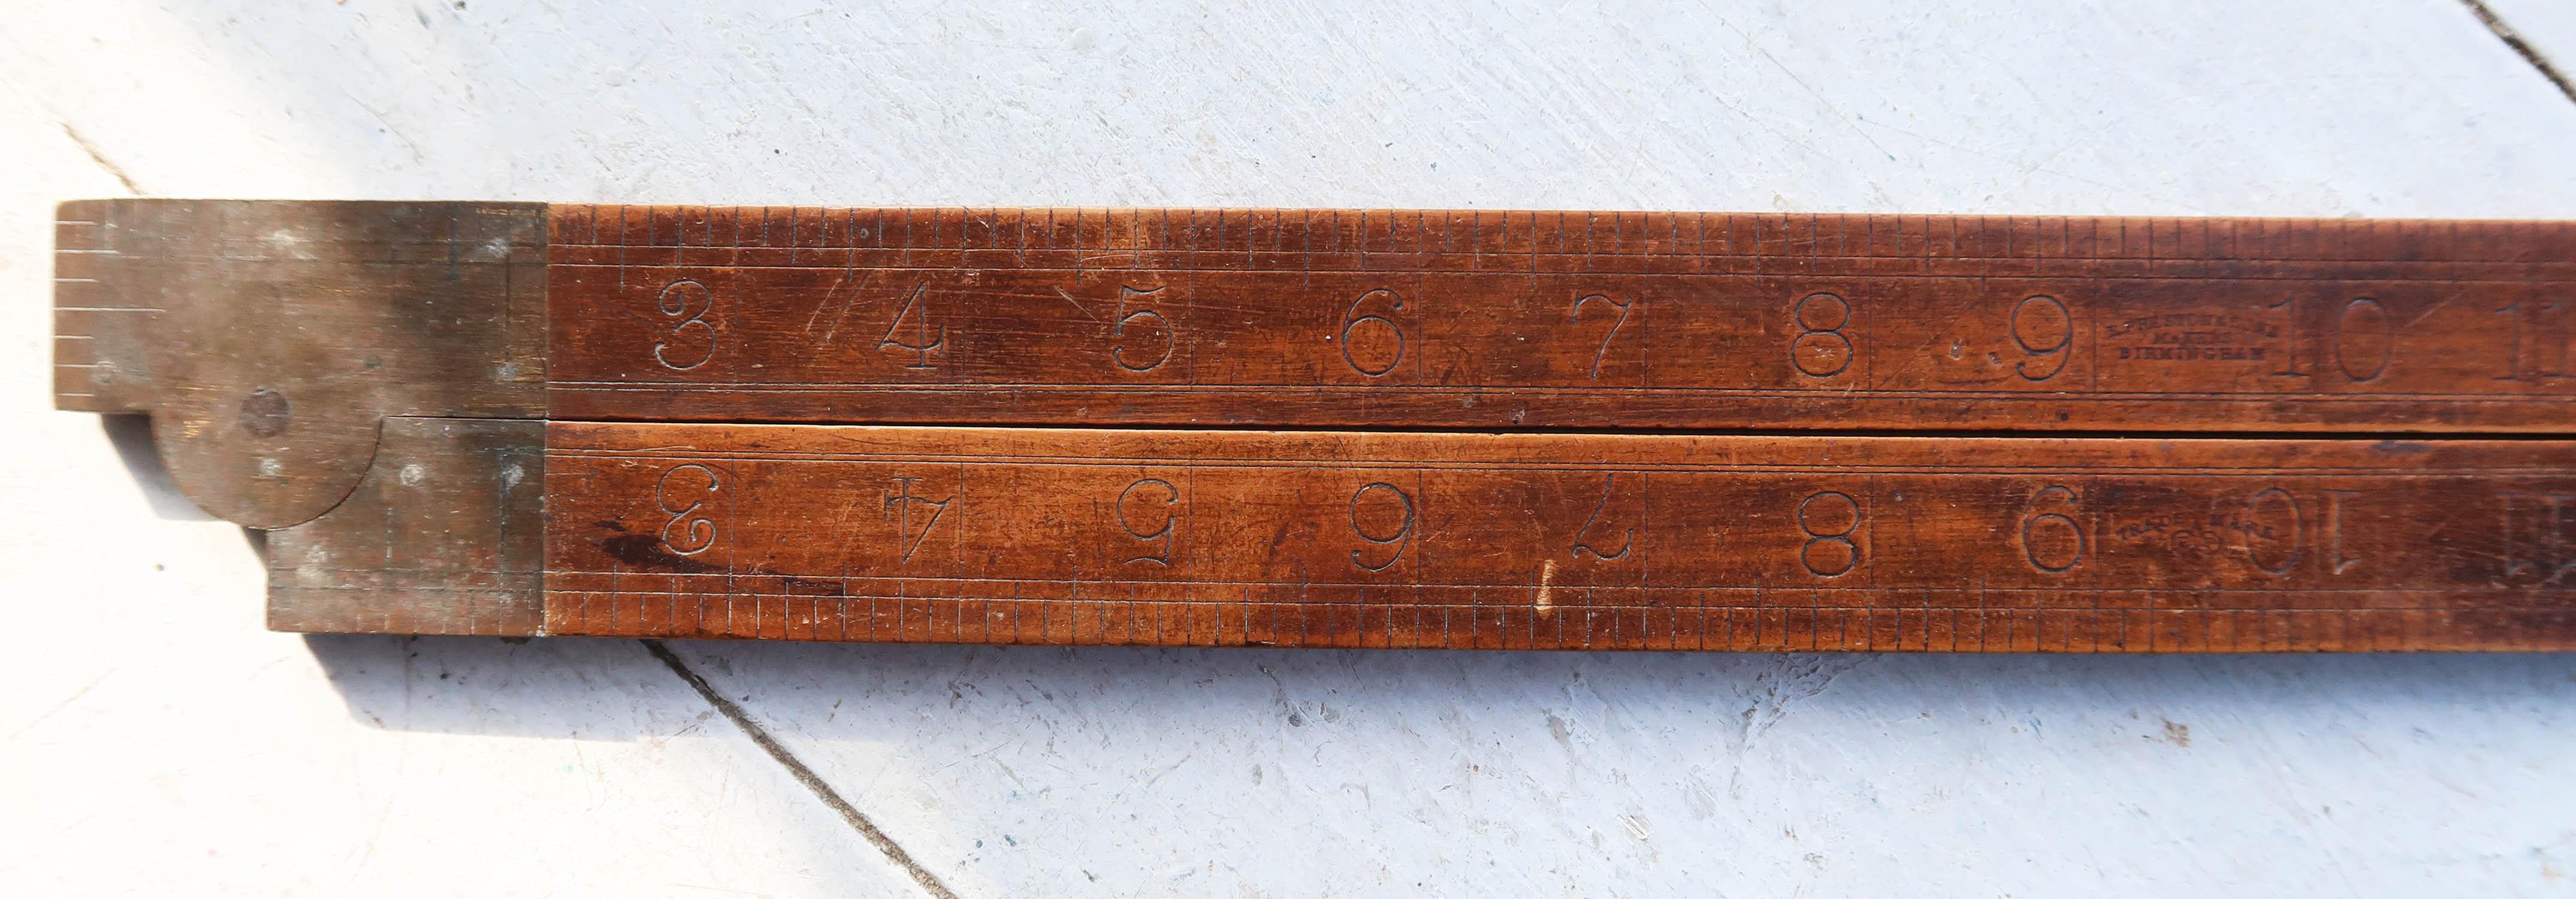 Antique Wood And Brass Folding Ruler By E.Preston. English, Late 19th Century For Sale 1